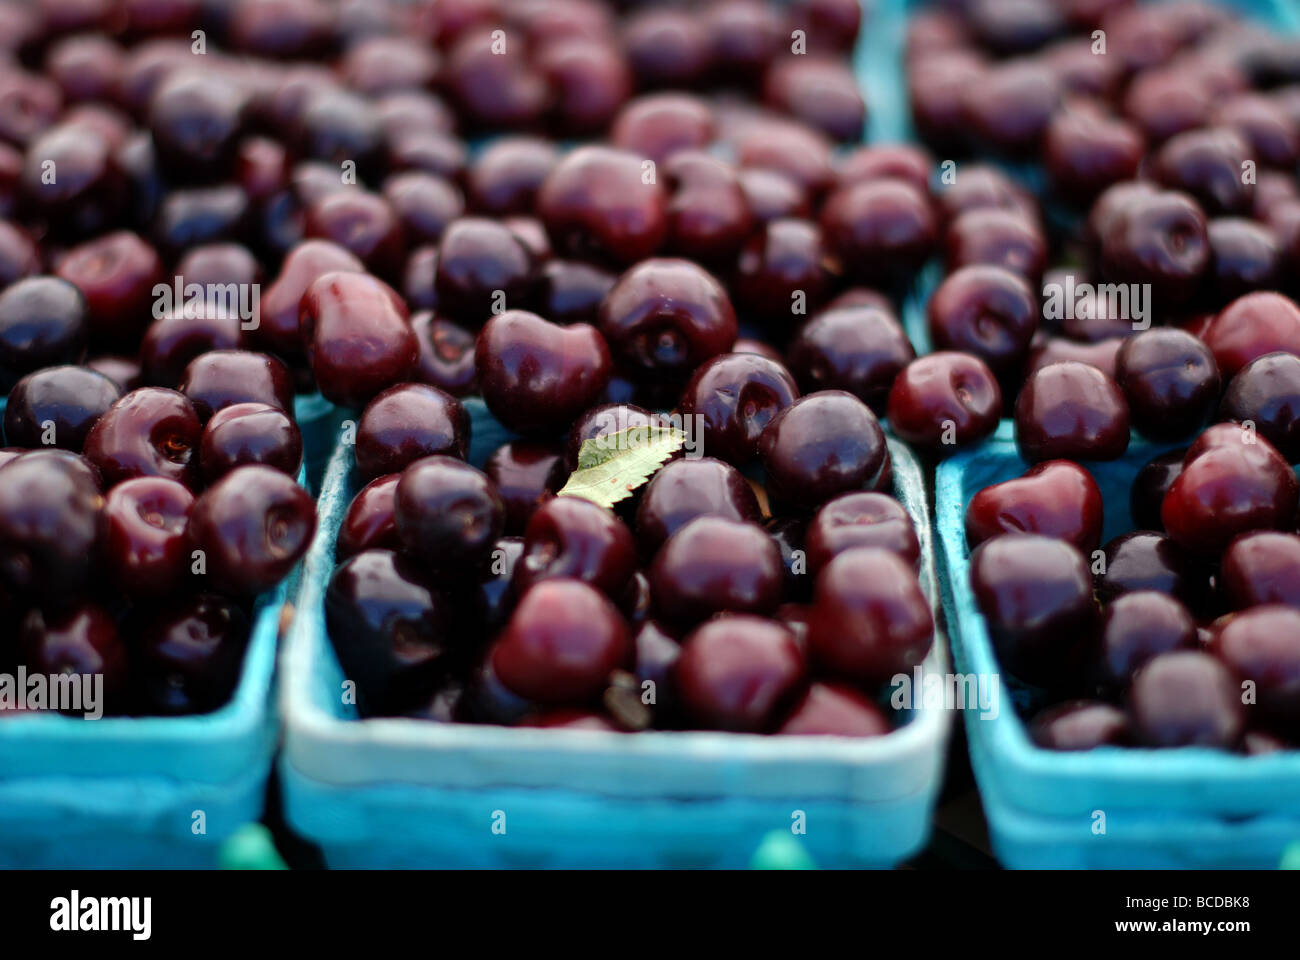 Colorful fruits and vegetables at the Evanston Farmers' Market. Cherries Stock Photo